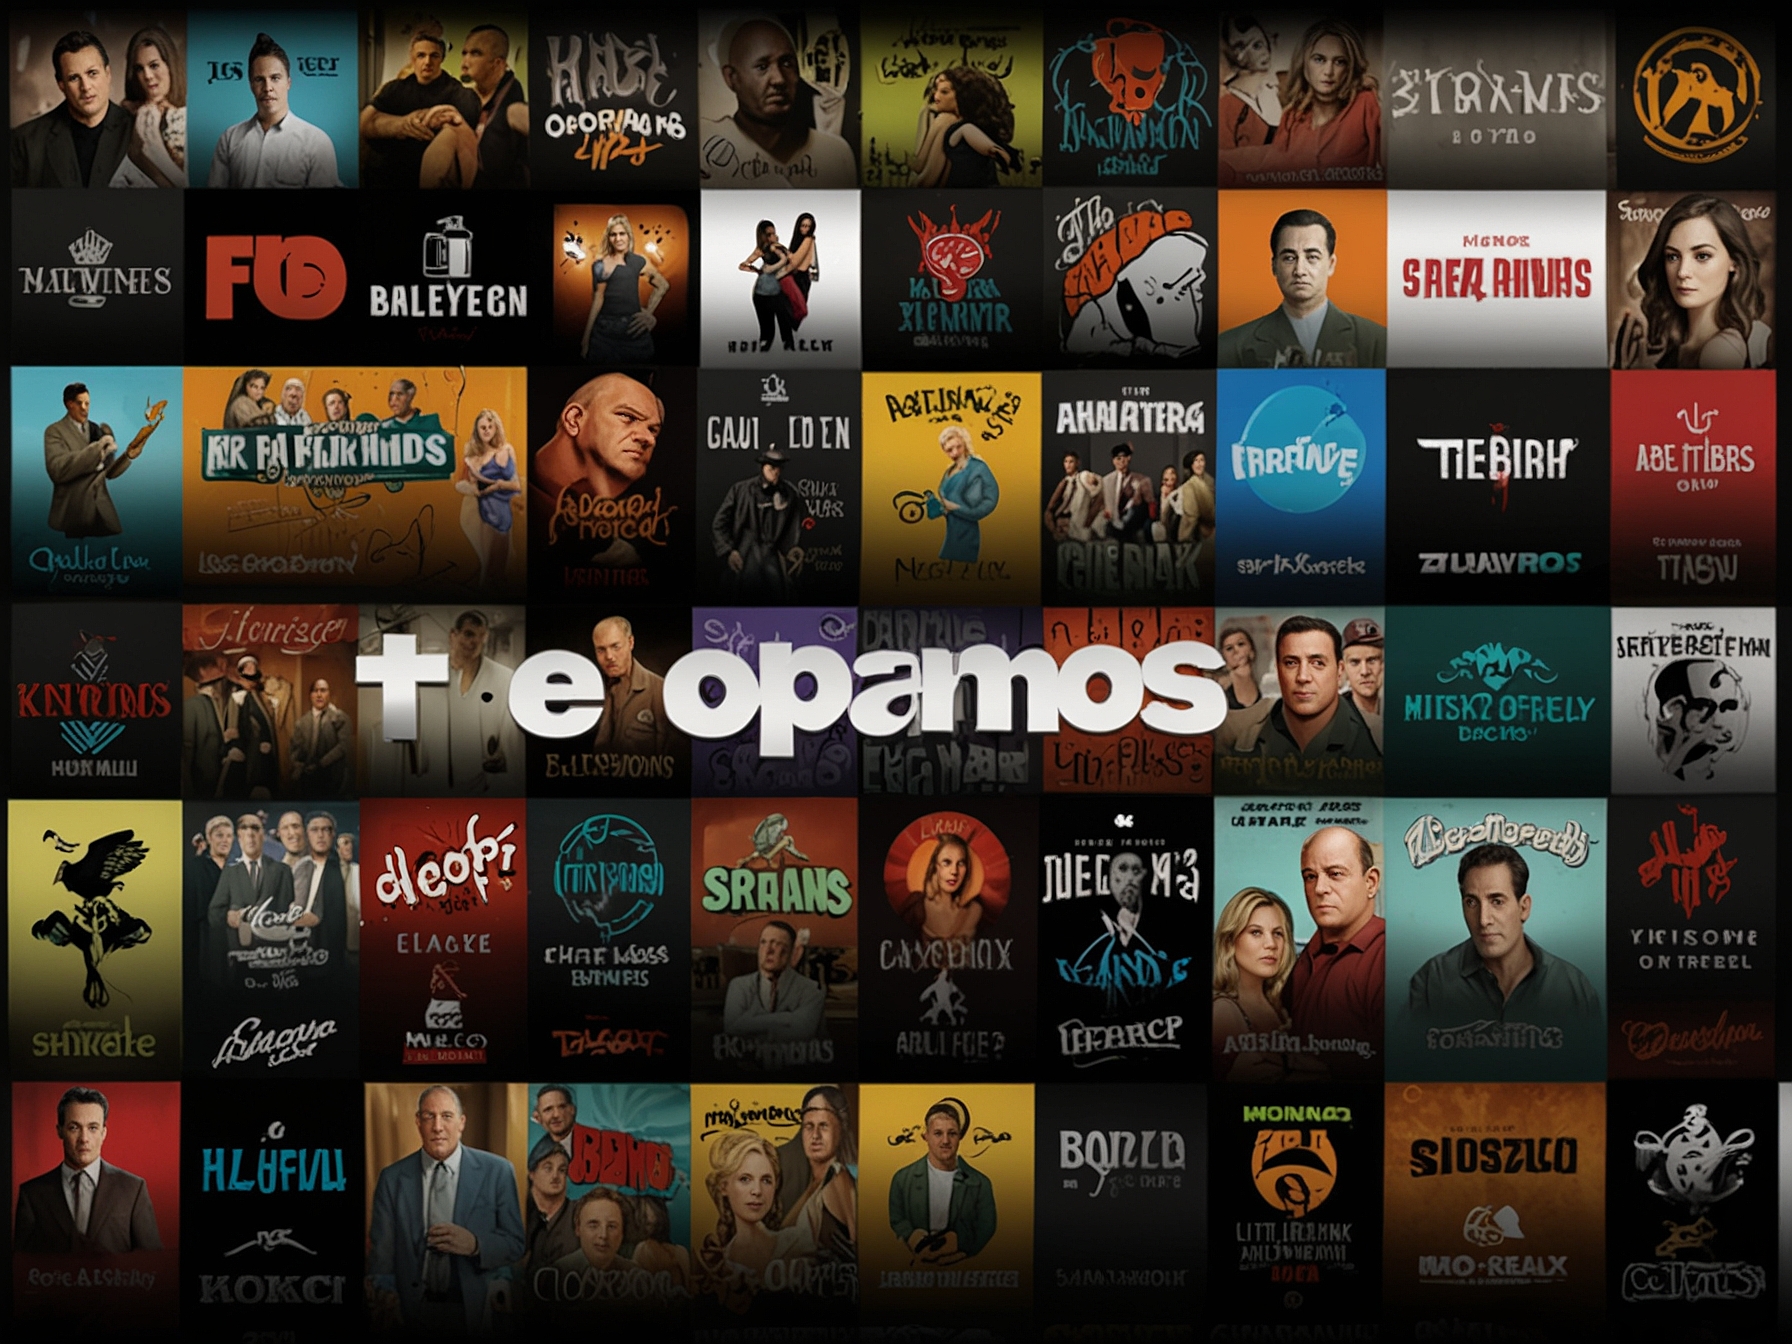 Screenshot of various streaming platform logos including HBO Max, Amazon Prime Video, and Hulu, highlighting the platforms where 'The Sopranos' can be streamed, with options for free access.